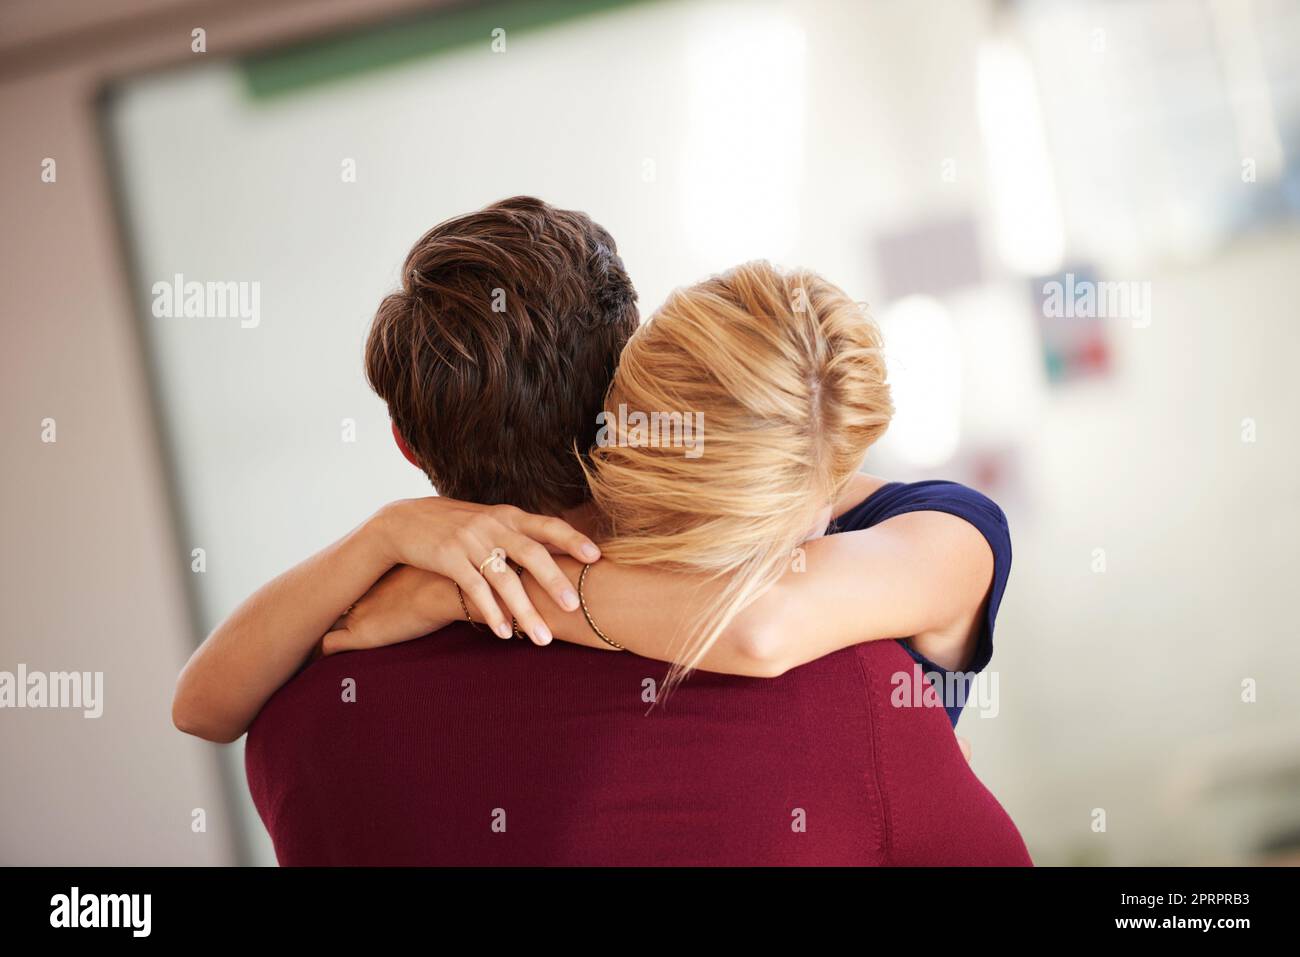 It started as an office romance. a couple hugging together in an open office. Stock Photo